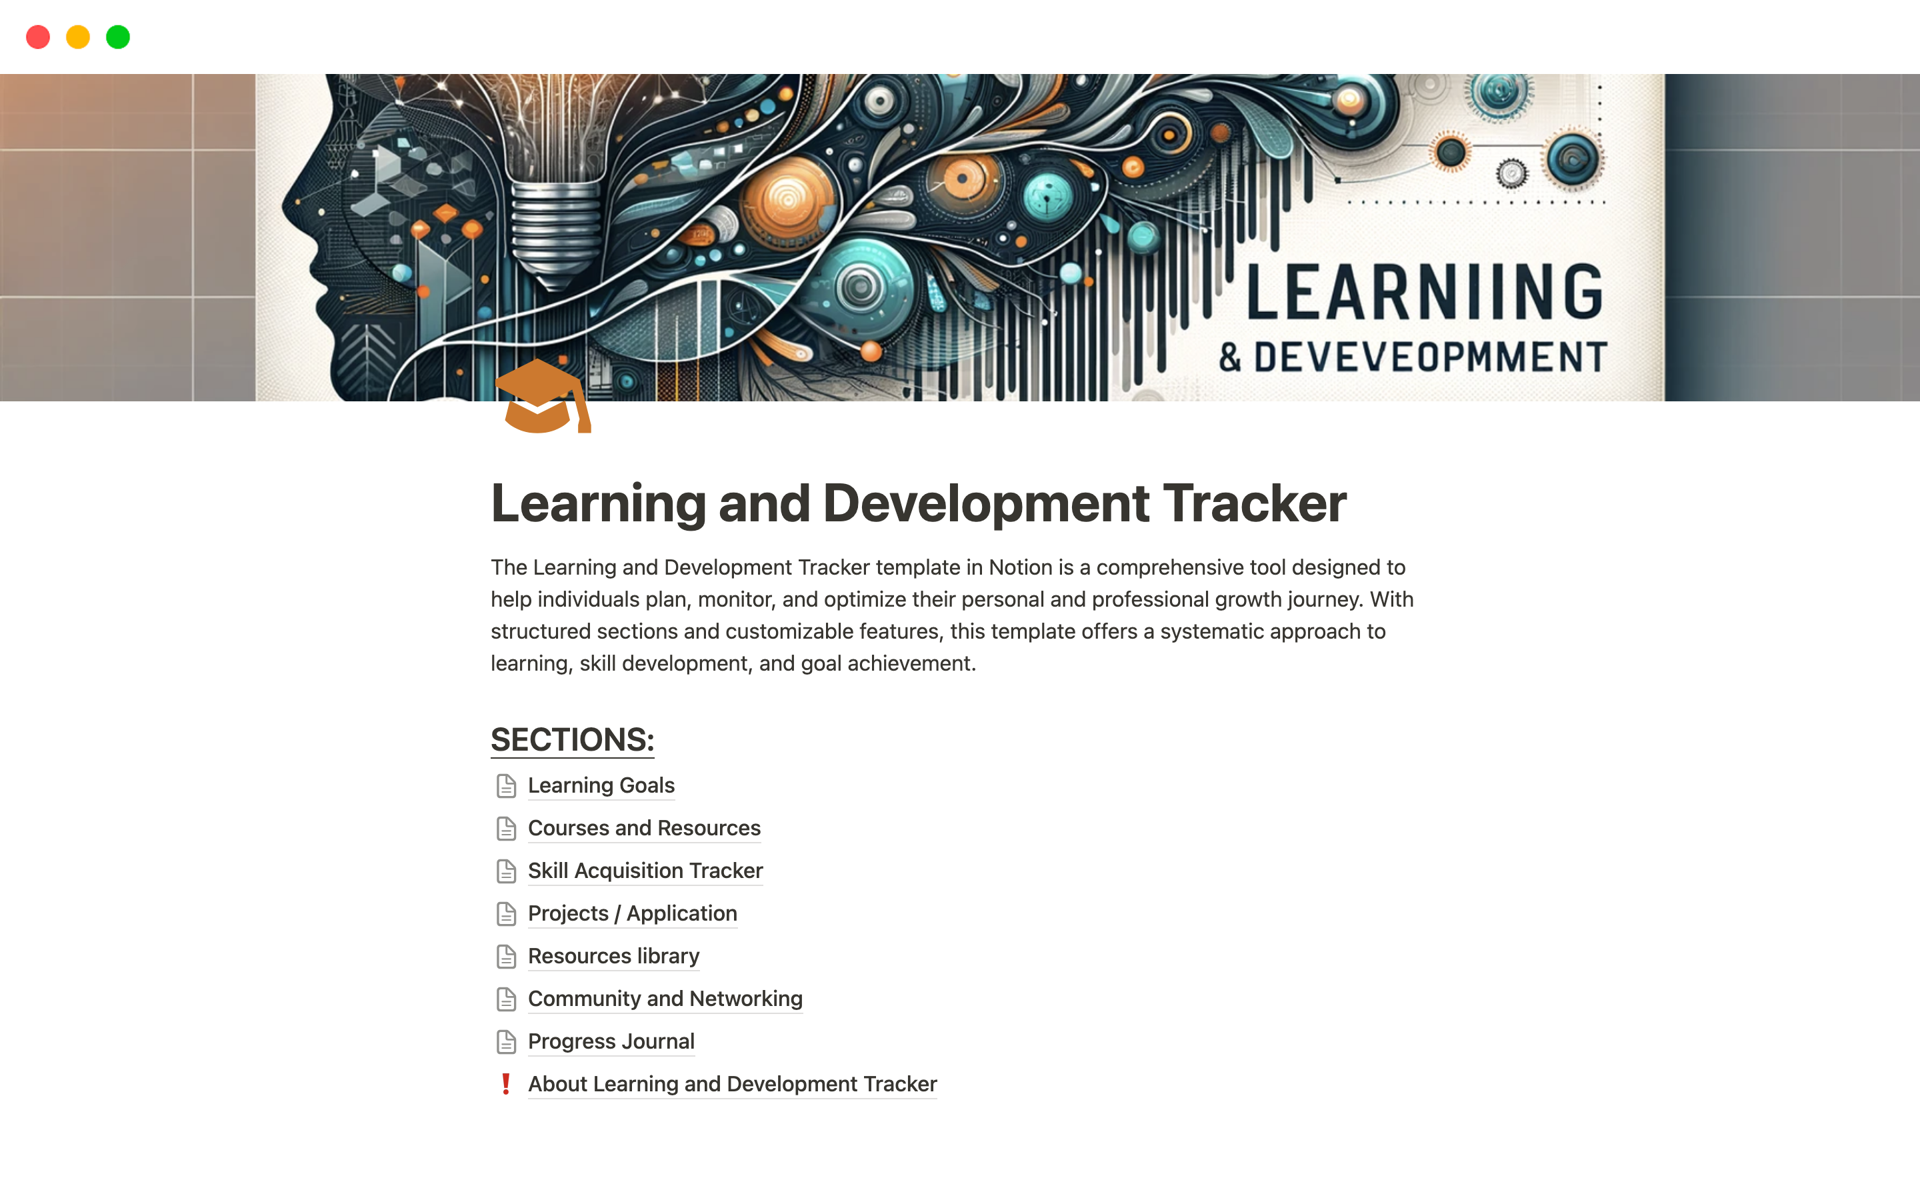 The Learning and Development Tracker template is a comprehensive tool designed to help individuals plan, monitor, and optimize their approach to learning, skill development, and goal achievement.